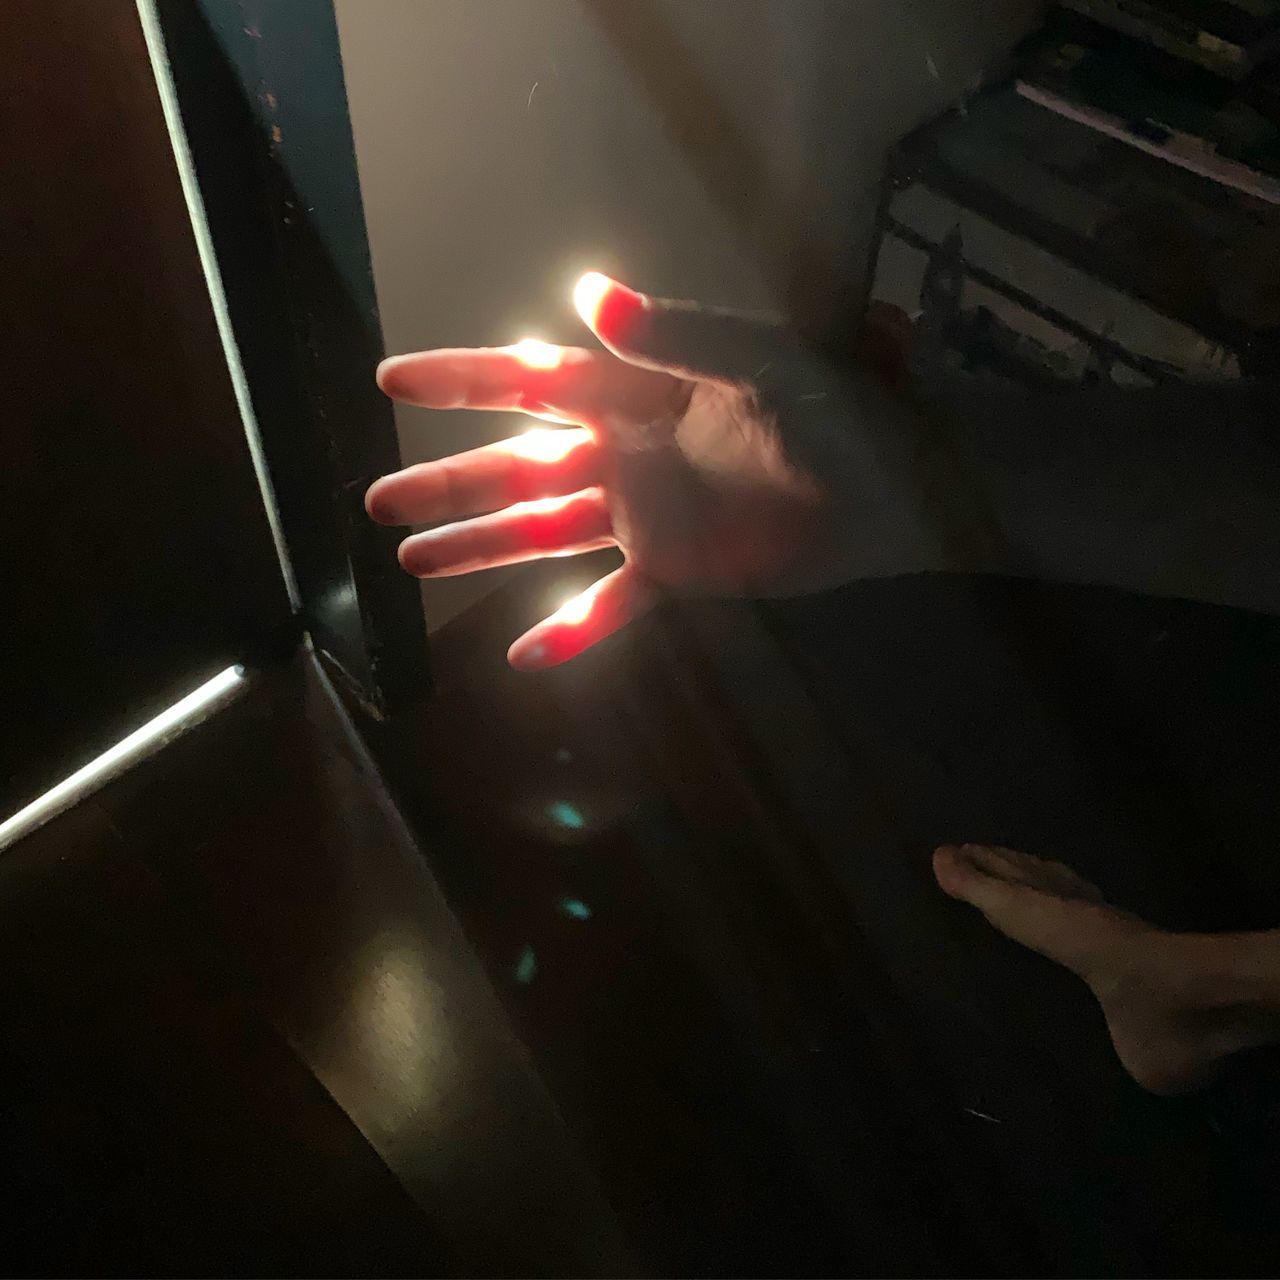 HIGH ANGLE VIEW OF PERSON HAND TOUCHING ILLUMINATED